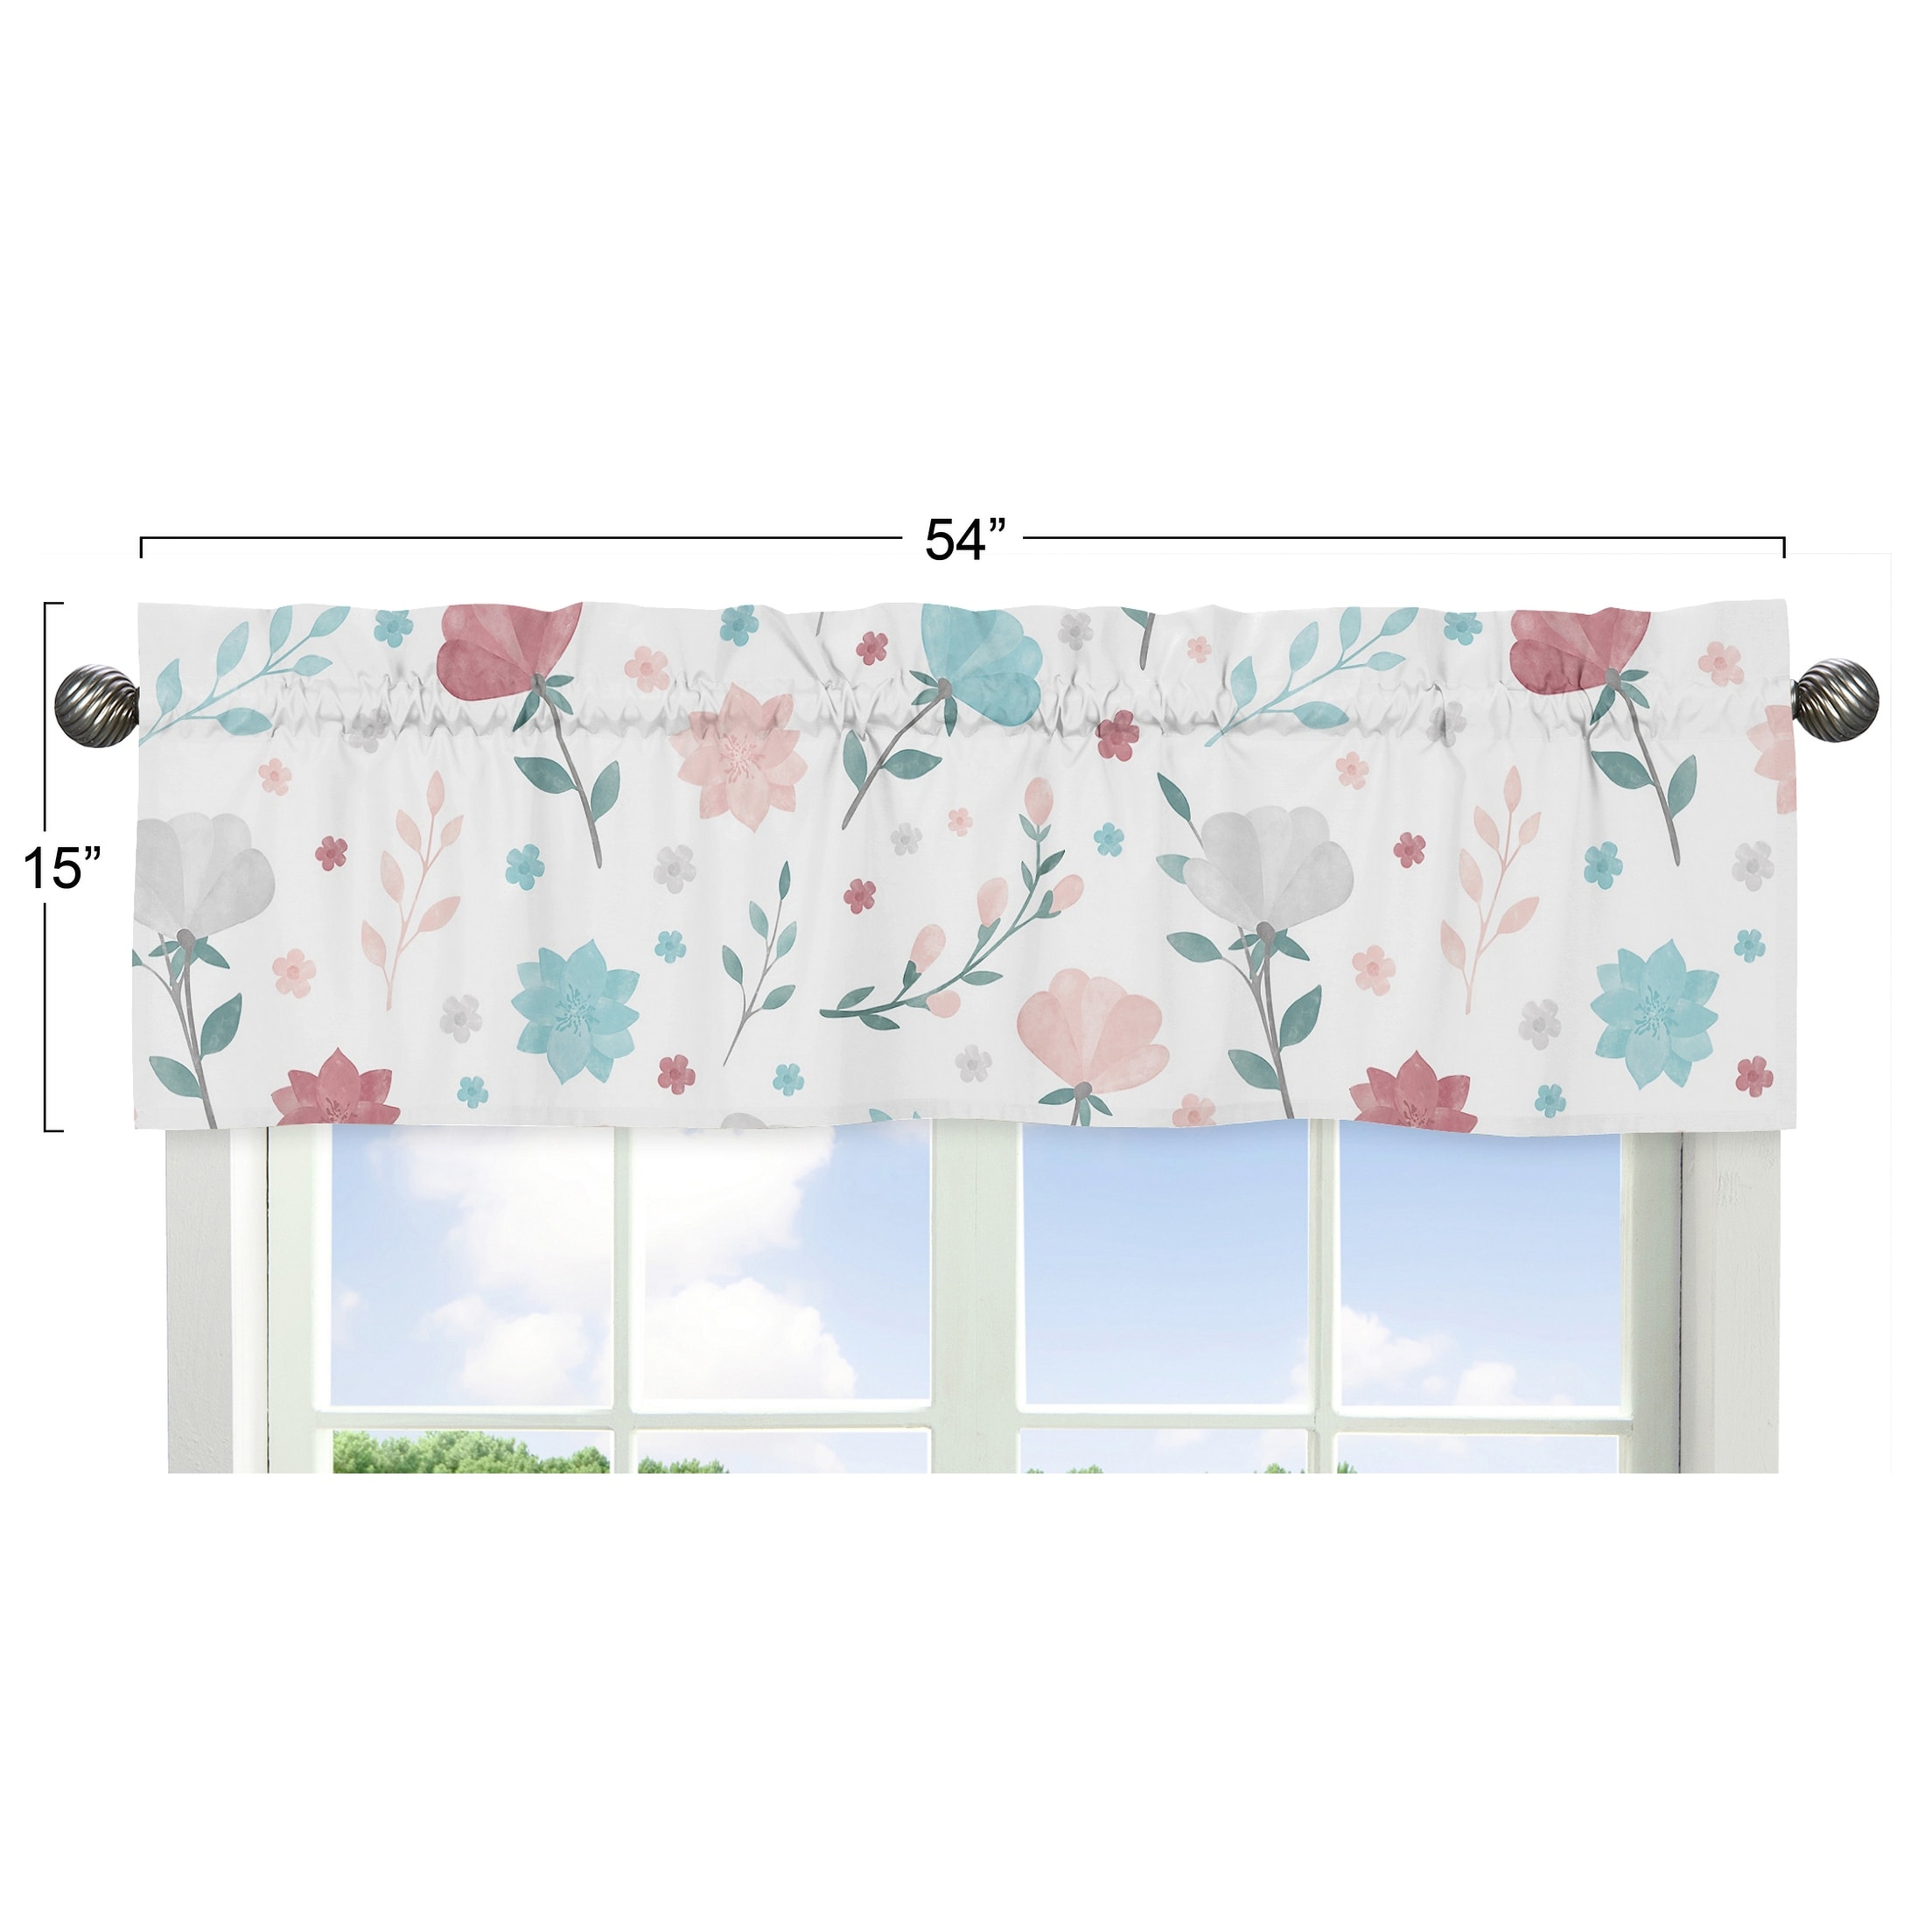 New Shabby Cottage Chic BLUE PEACH ROSE Floral Valance Window Curtains 